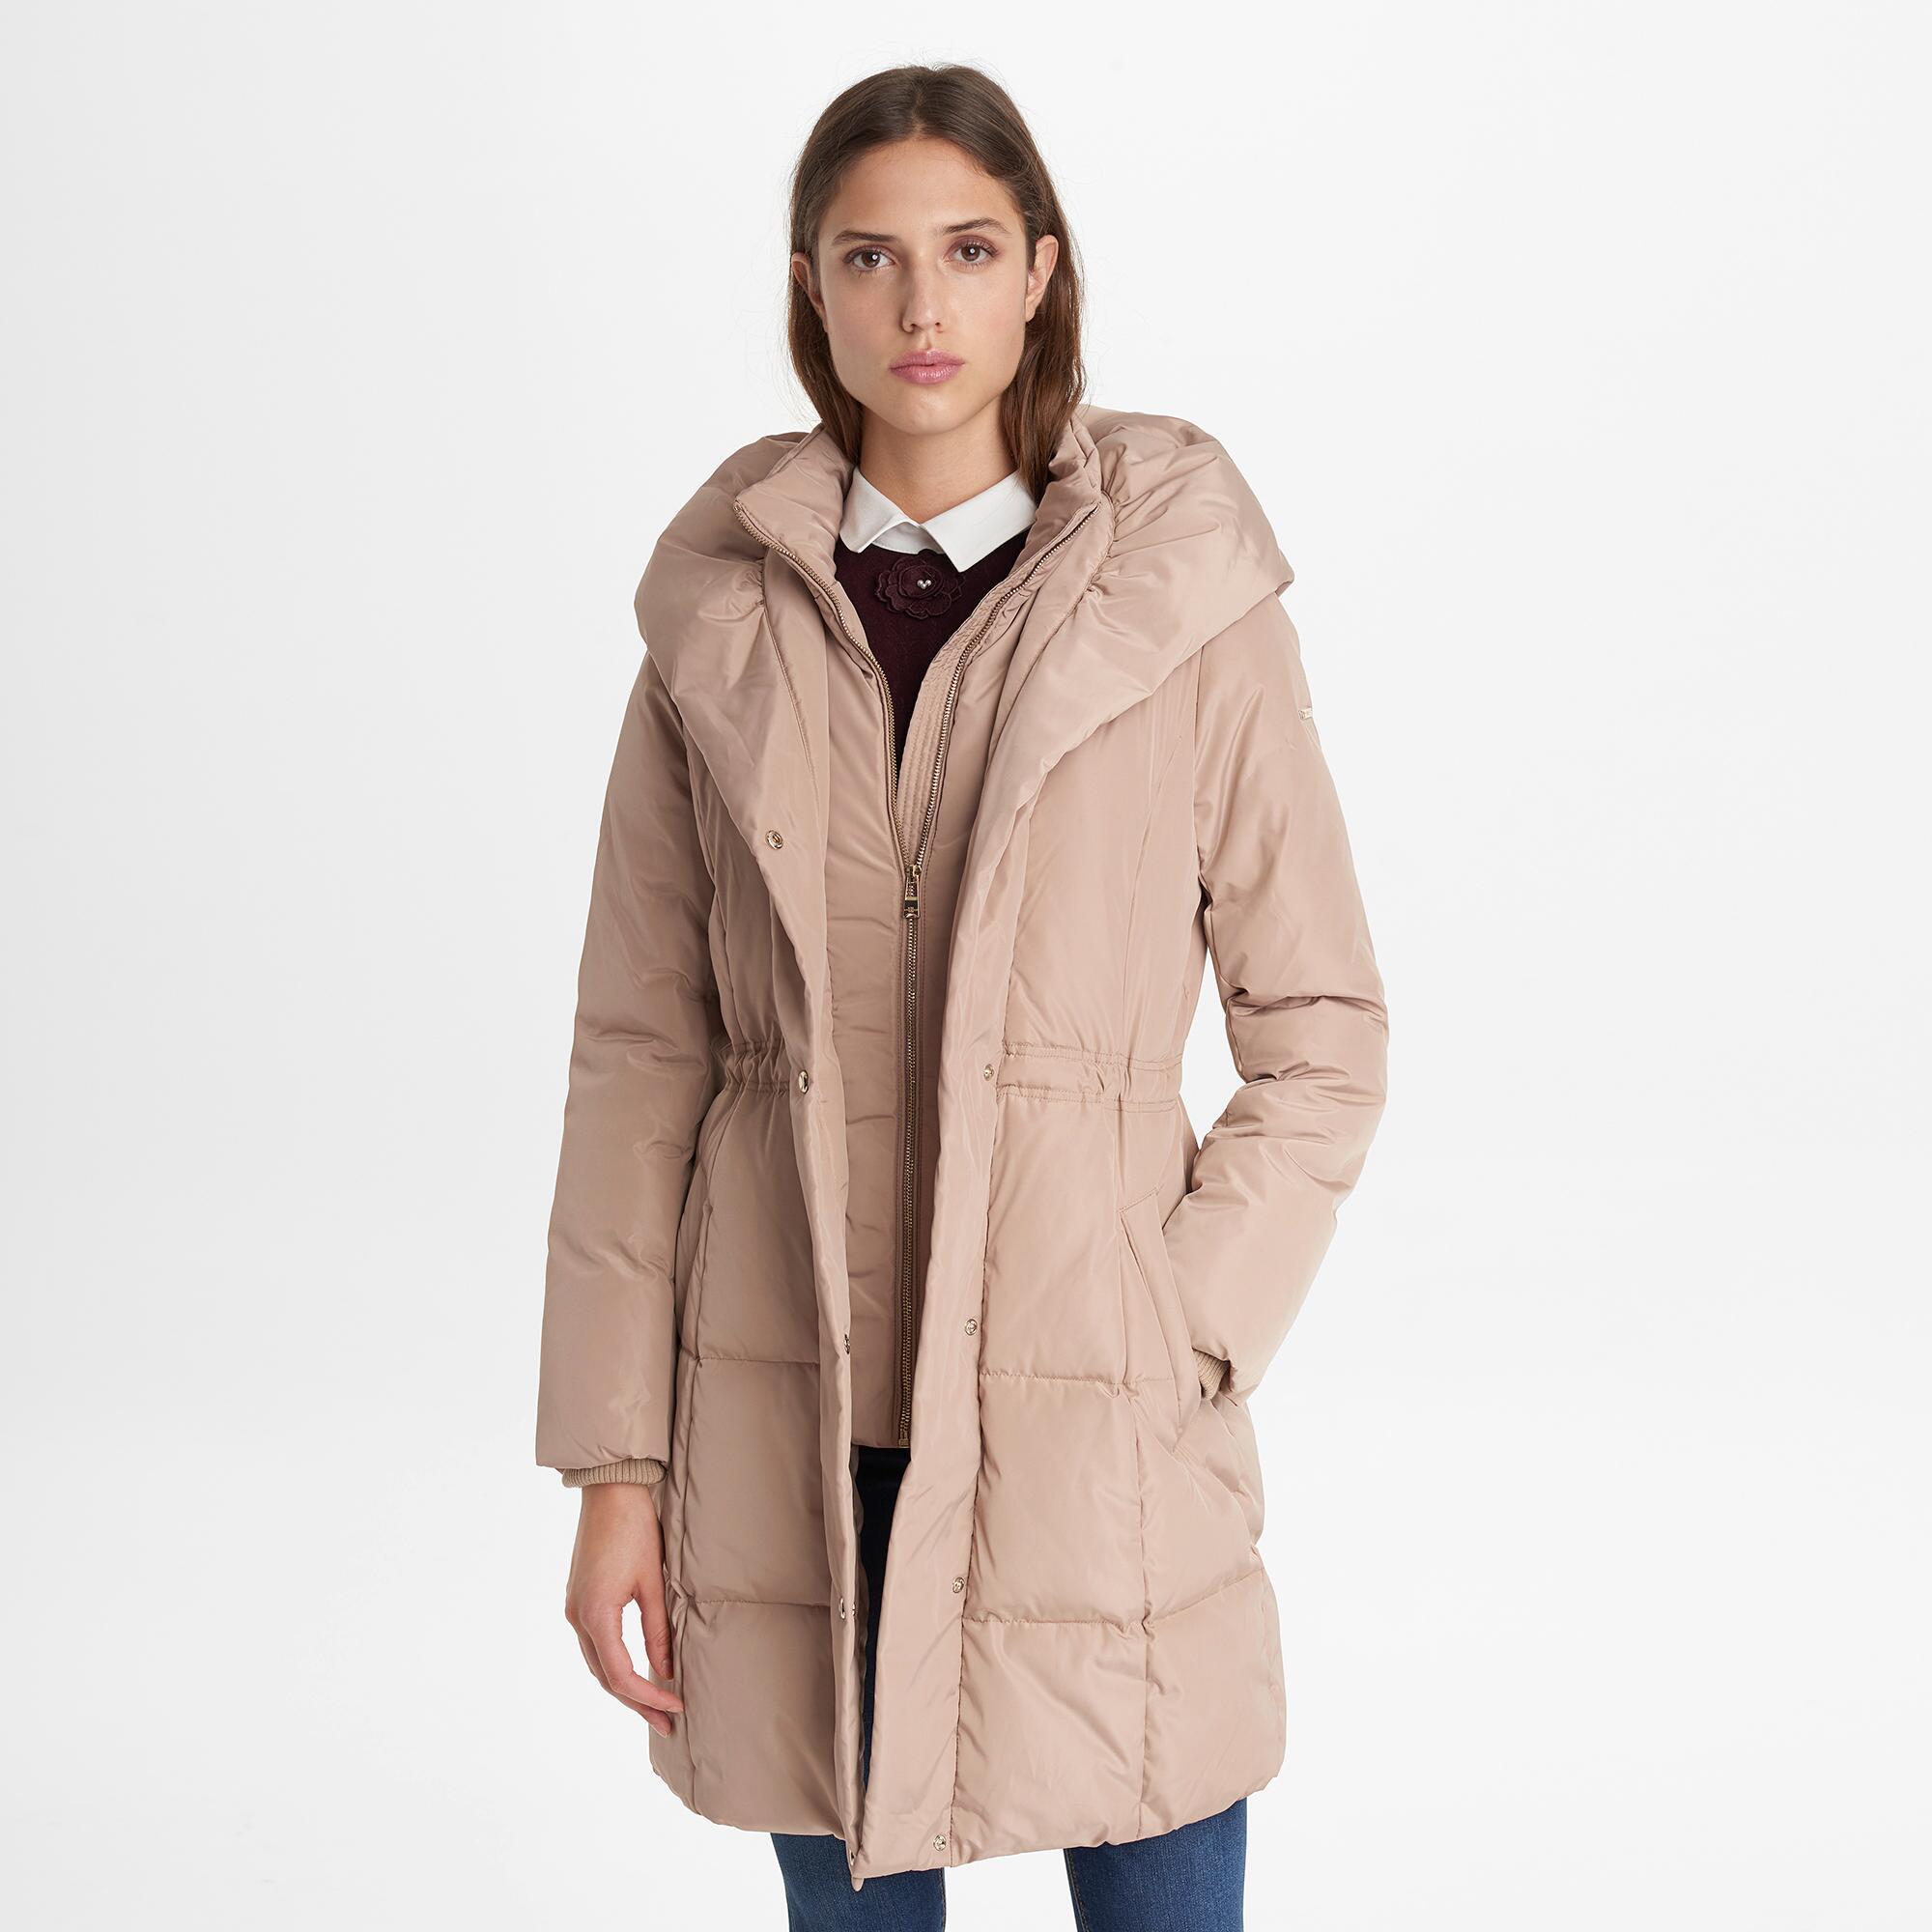 Karl Lagerfeld Synthetic Puffer Anorak Jacket With Pillow Collar in ...